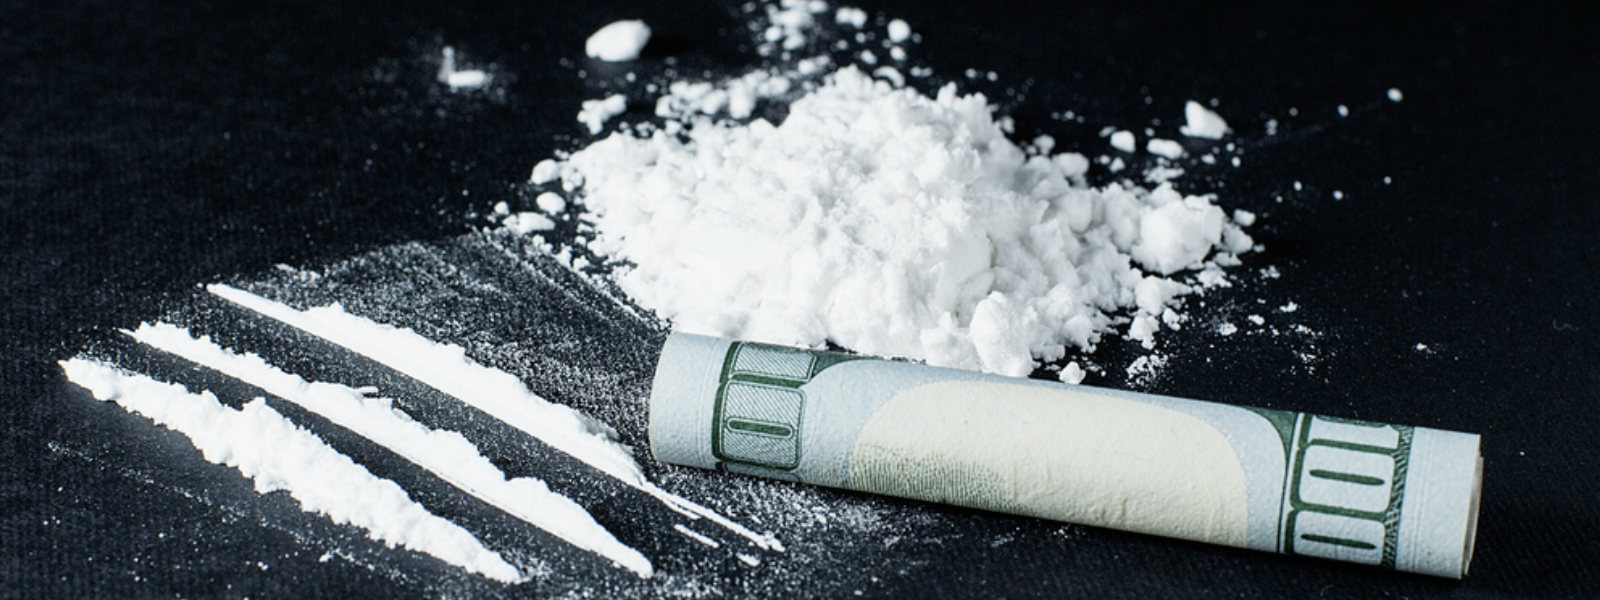 938g of cocaine seized from Mannar